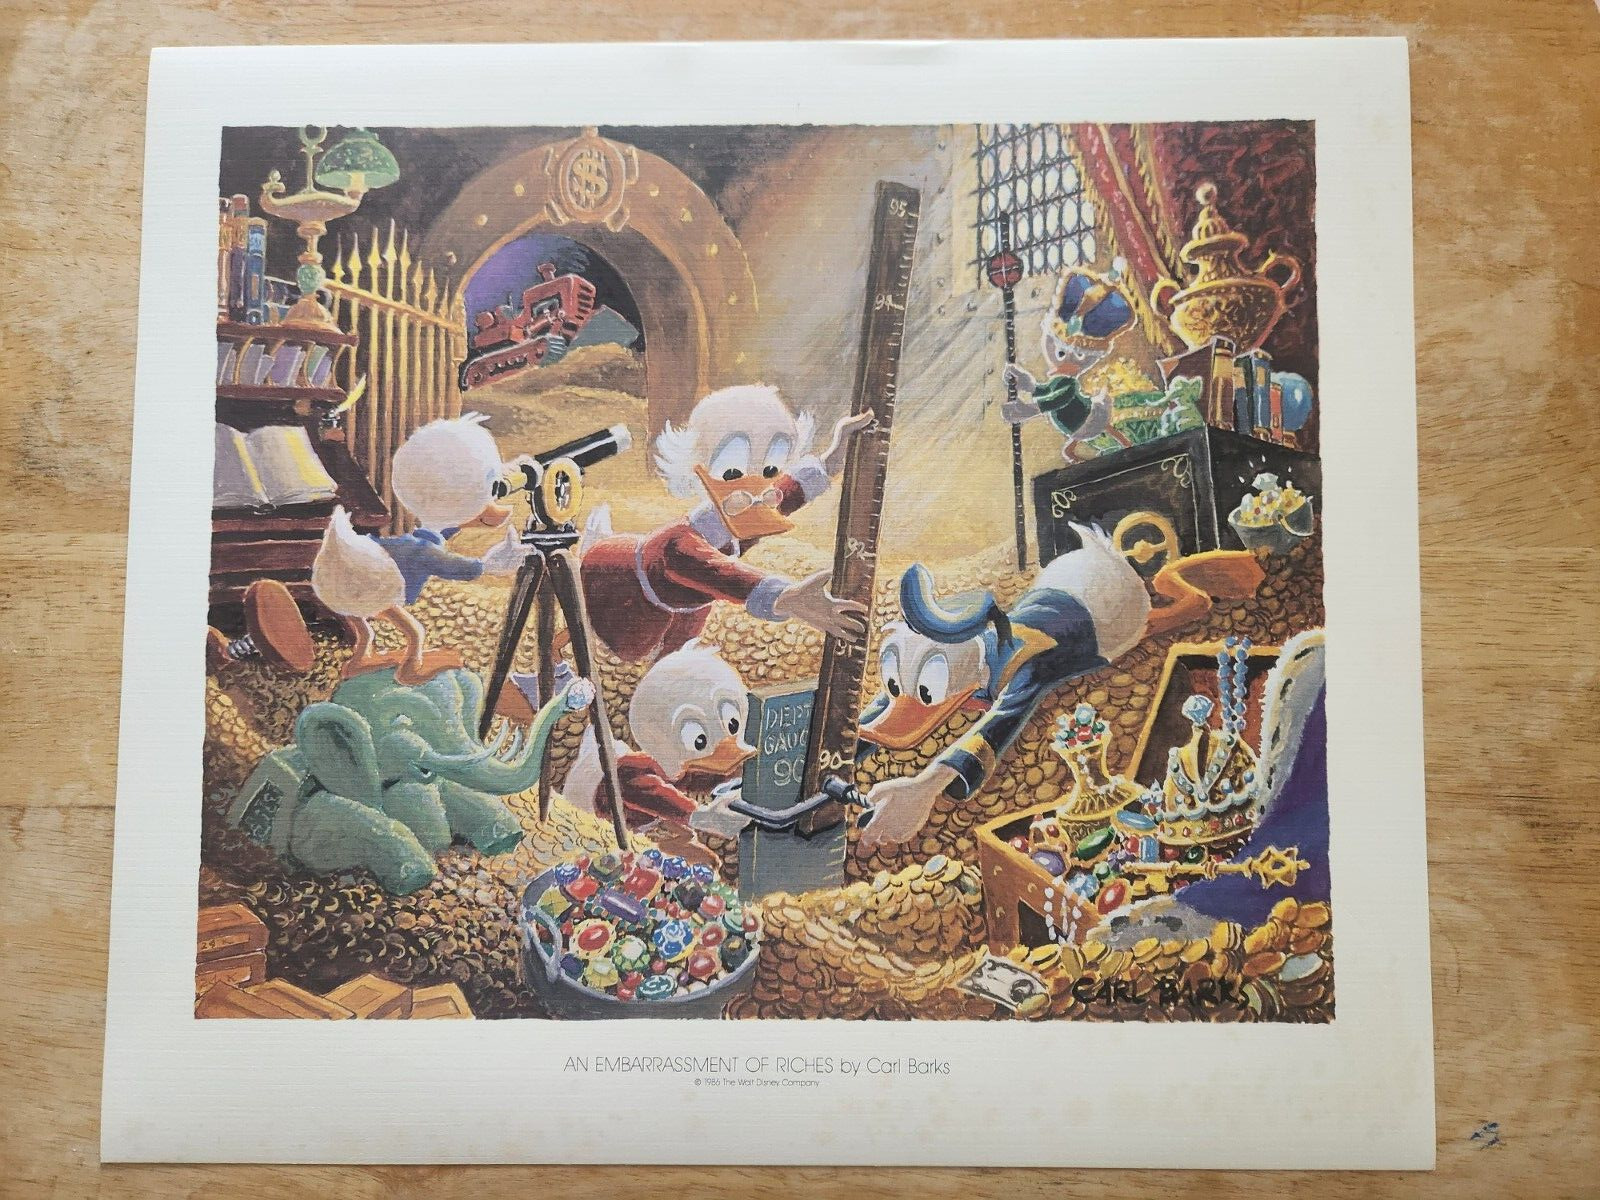 Carl Barks lithograph An Embarrassment of Riches